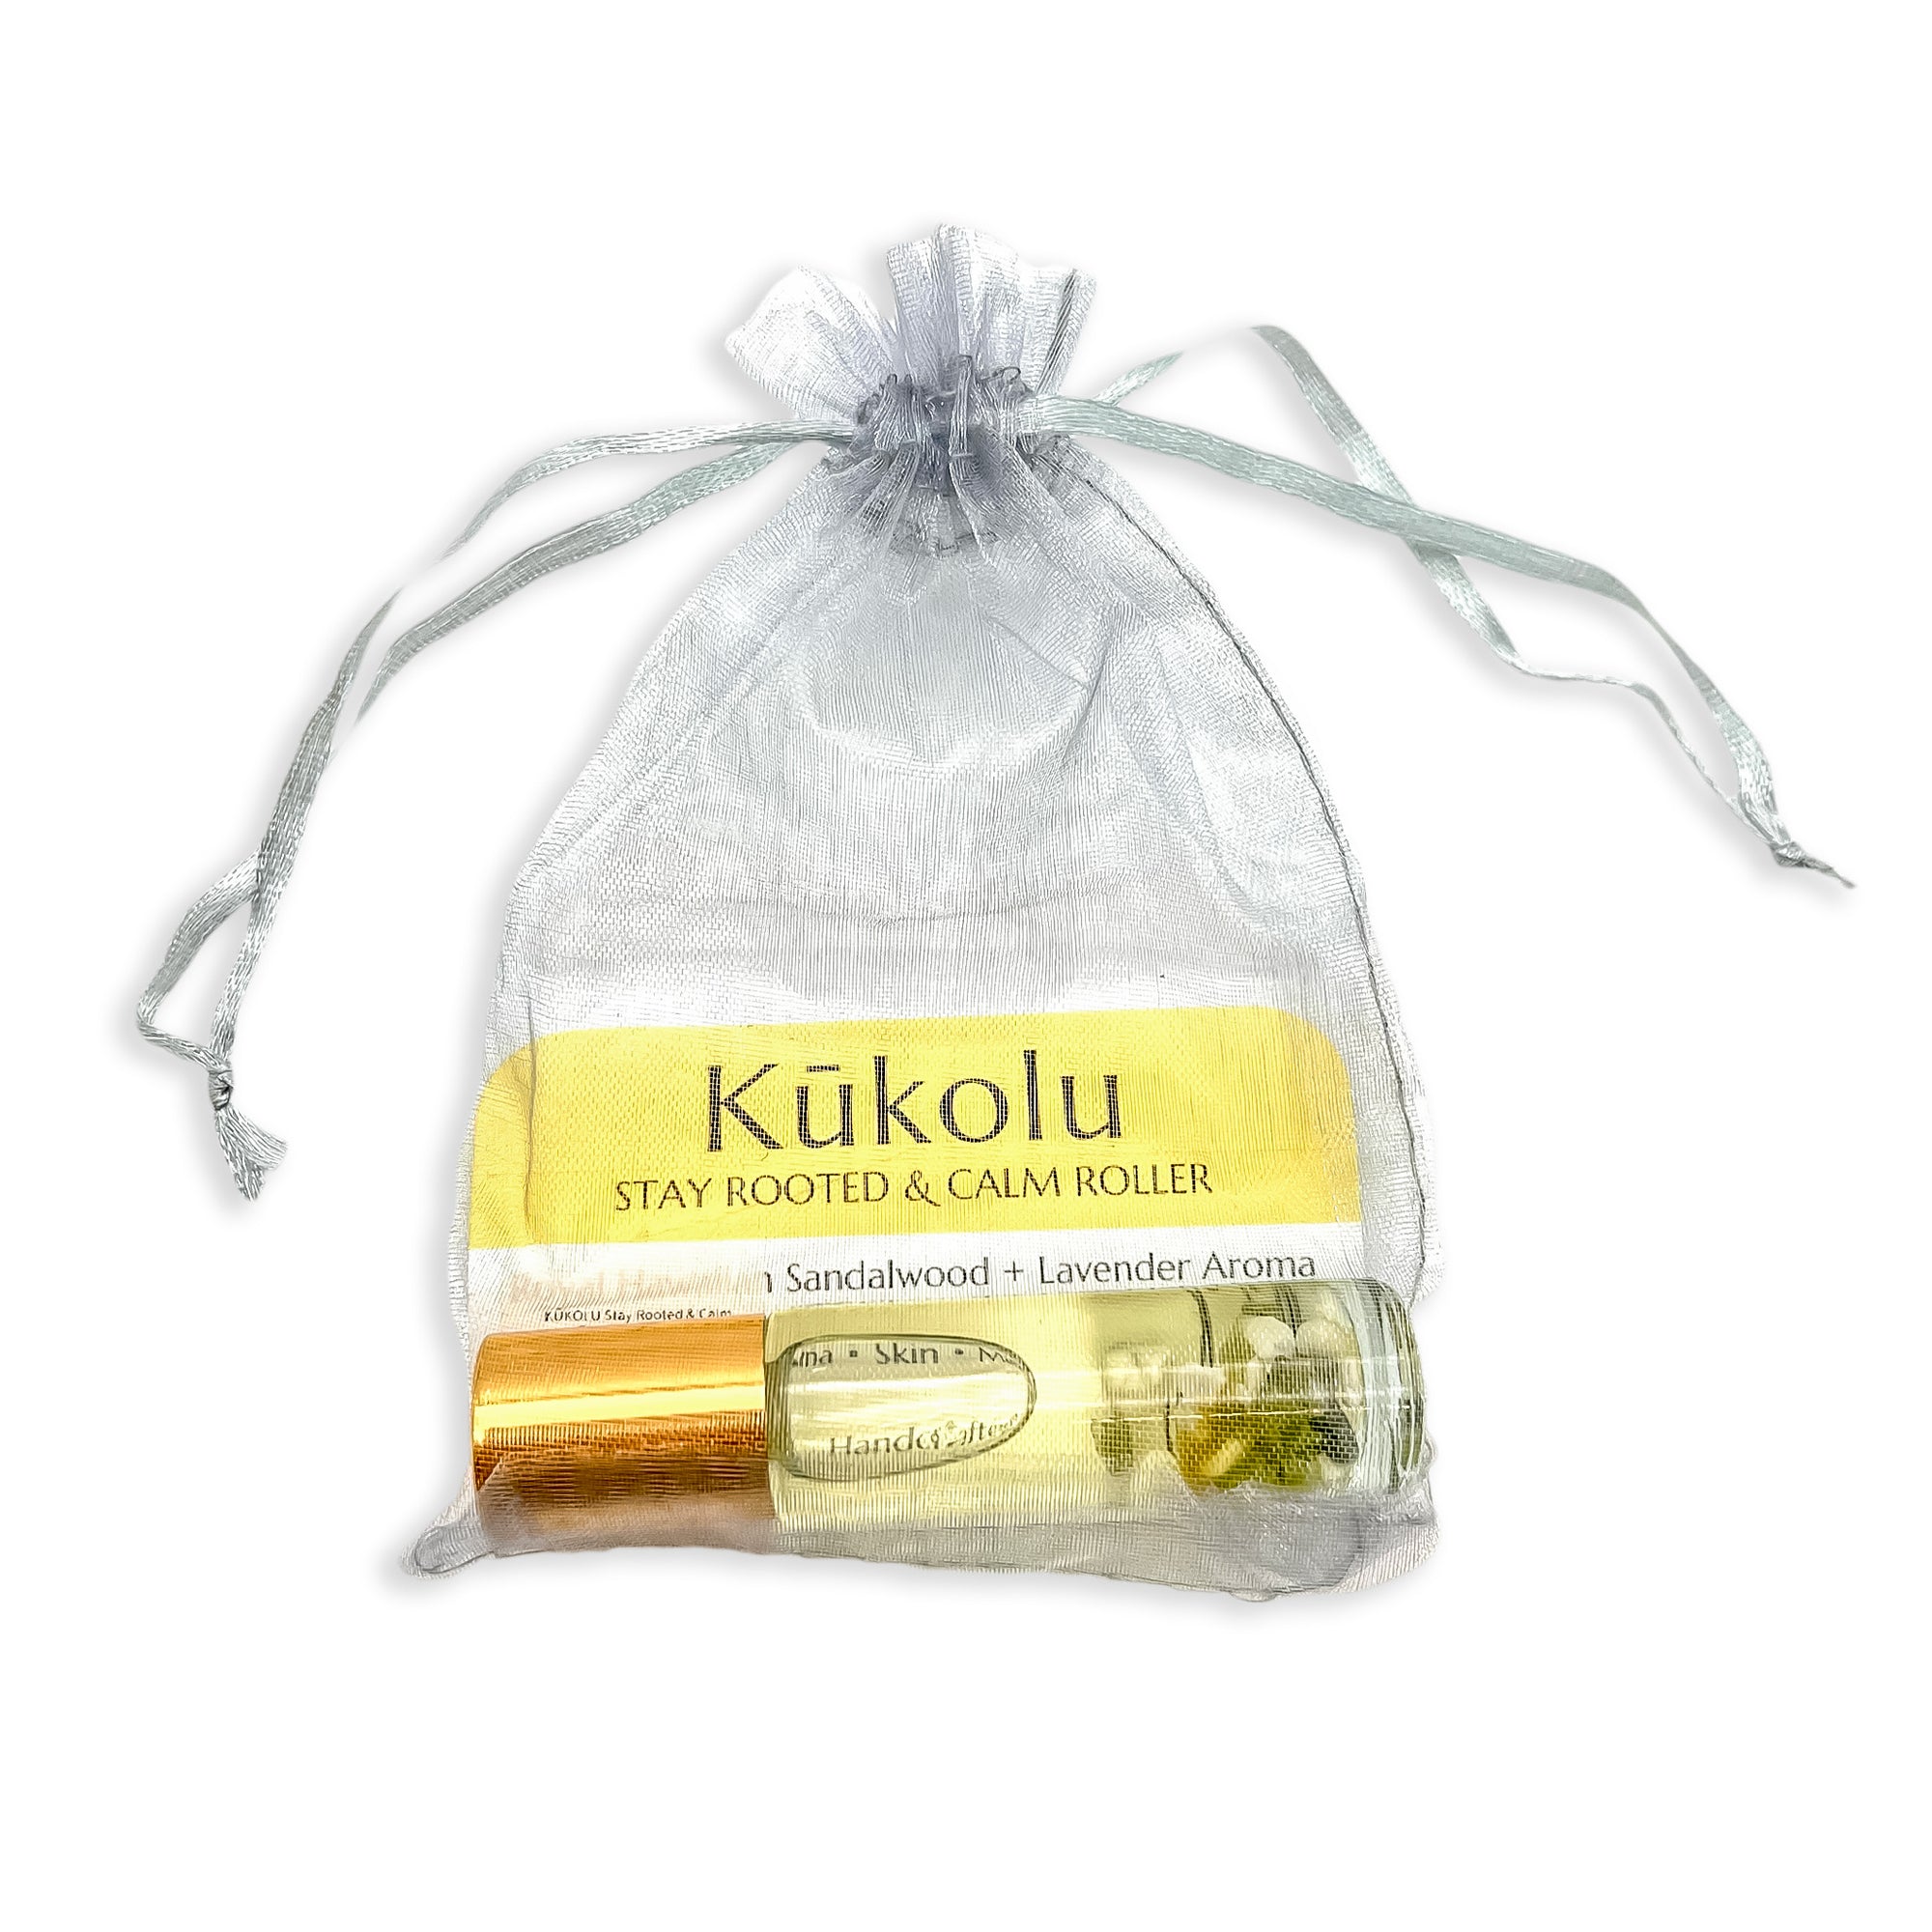 Pop-Up Mākeke - Botanica Skincare - Kūkolu Stay Rooted & Calm Essential Oil Roller - Front View